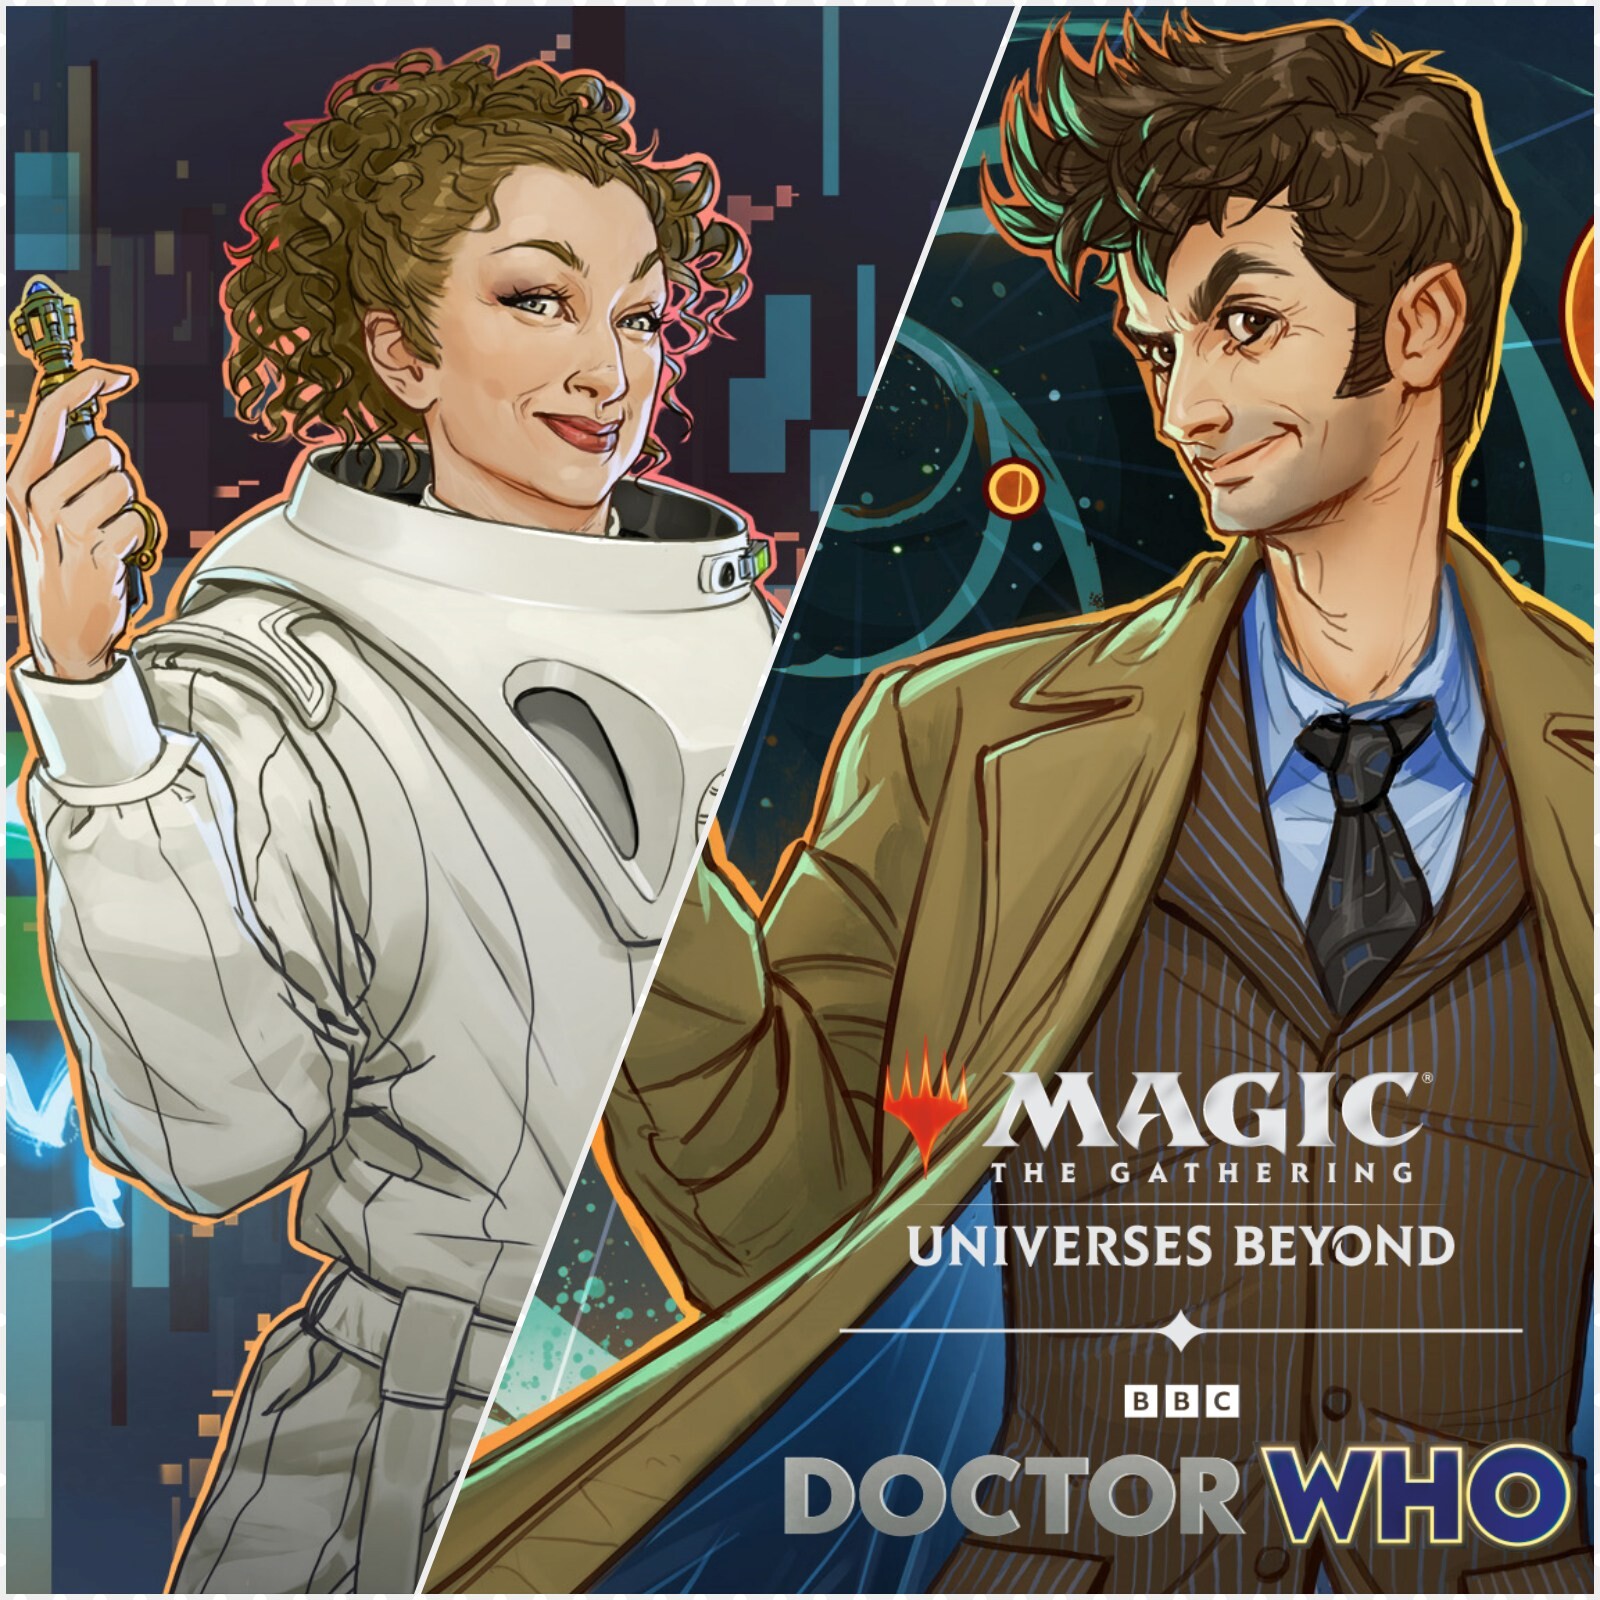 River Song & the 10th Doctor